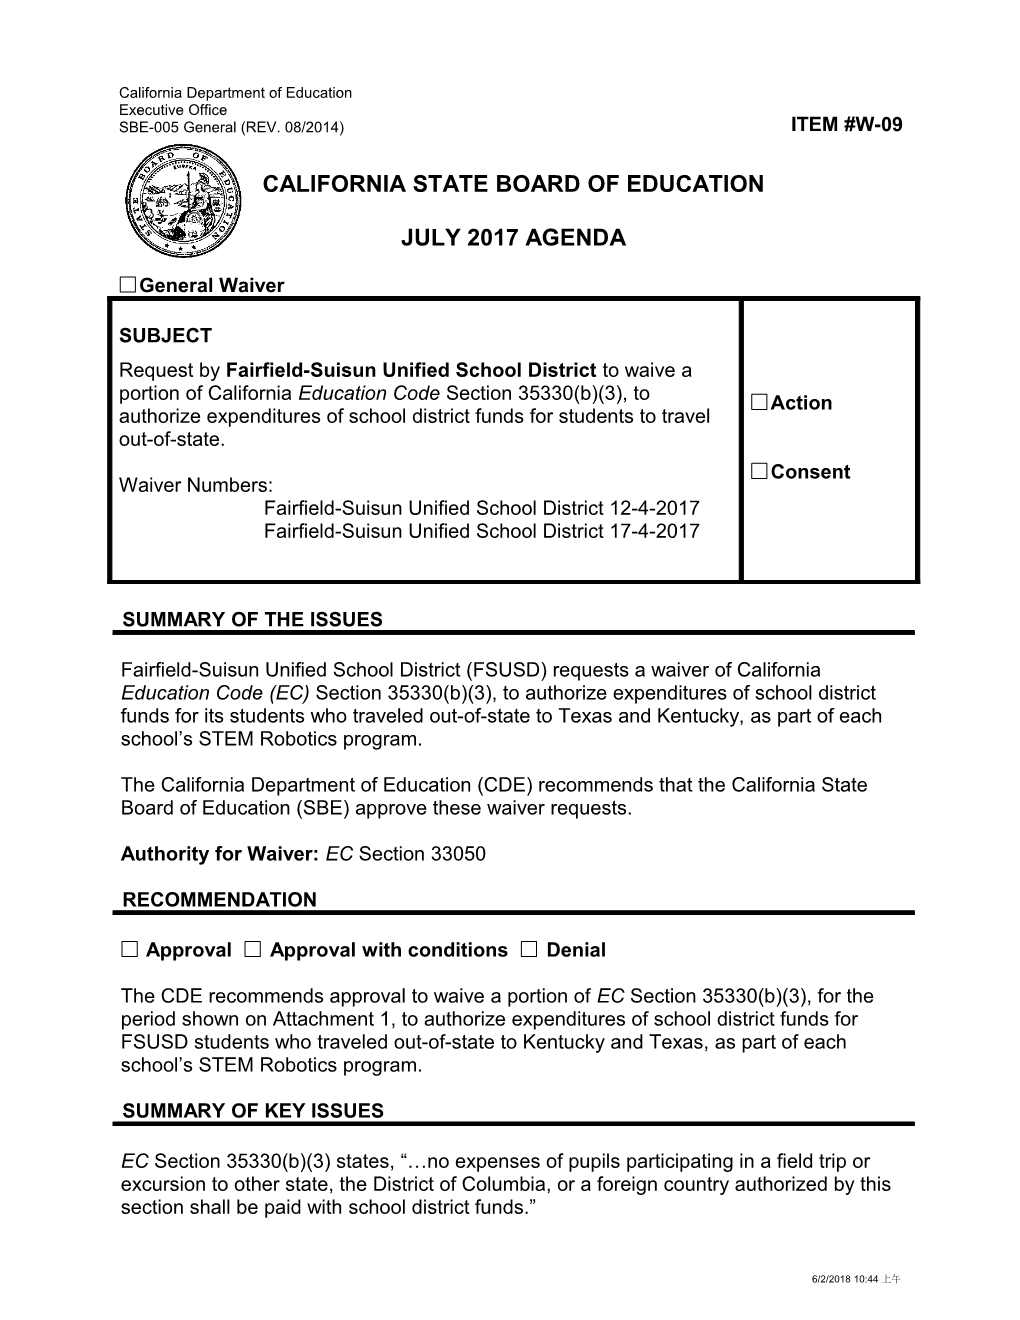 July 2017 Waiver Item W-09 - Meeting Agendas (CA State Board of Education)